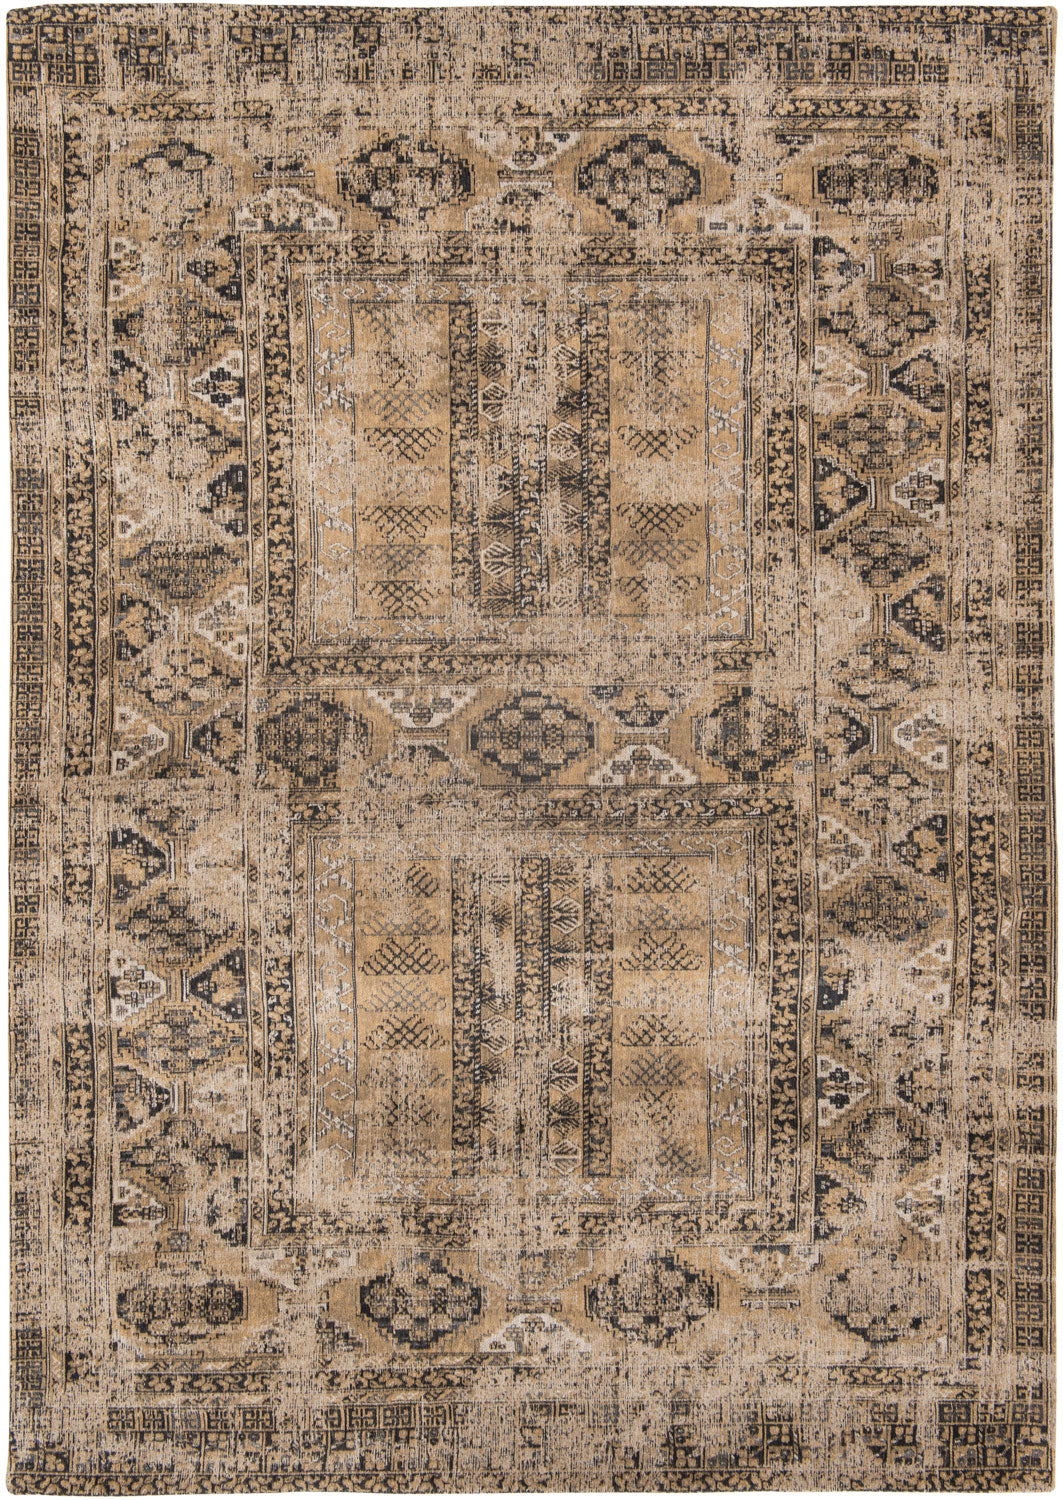 Full view of detail on warm beige distressed rug